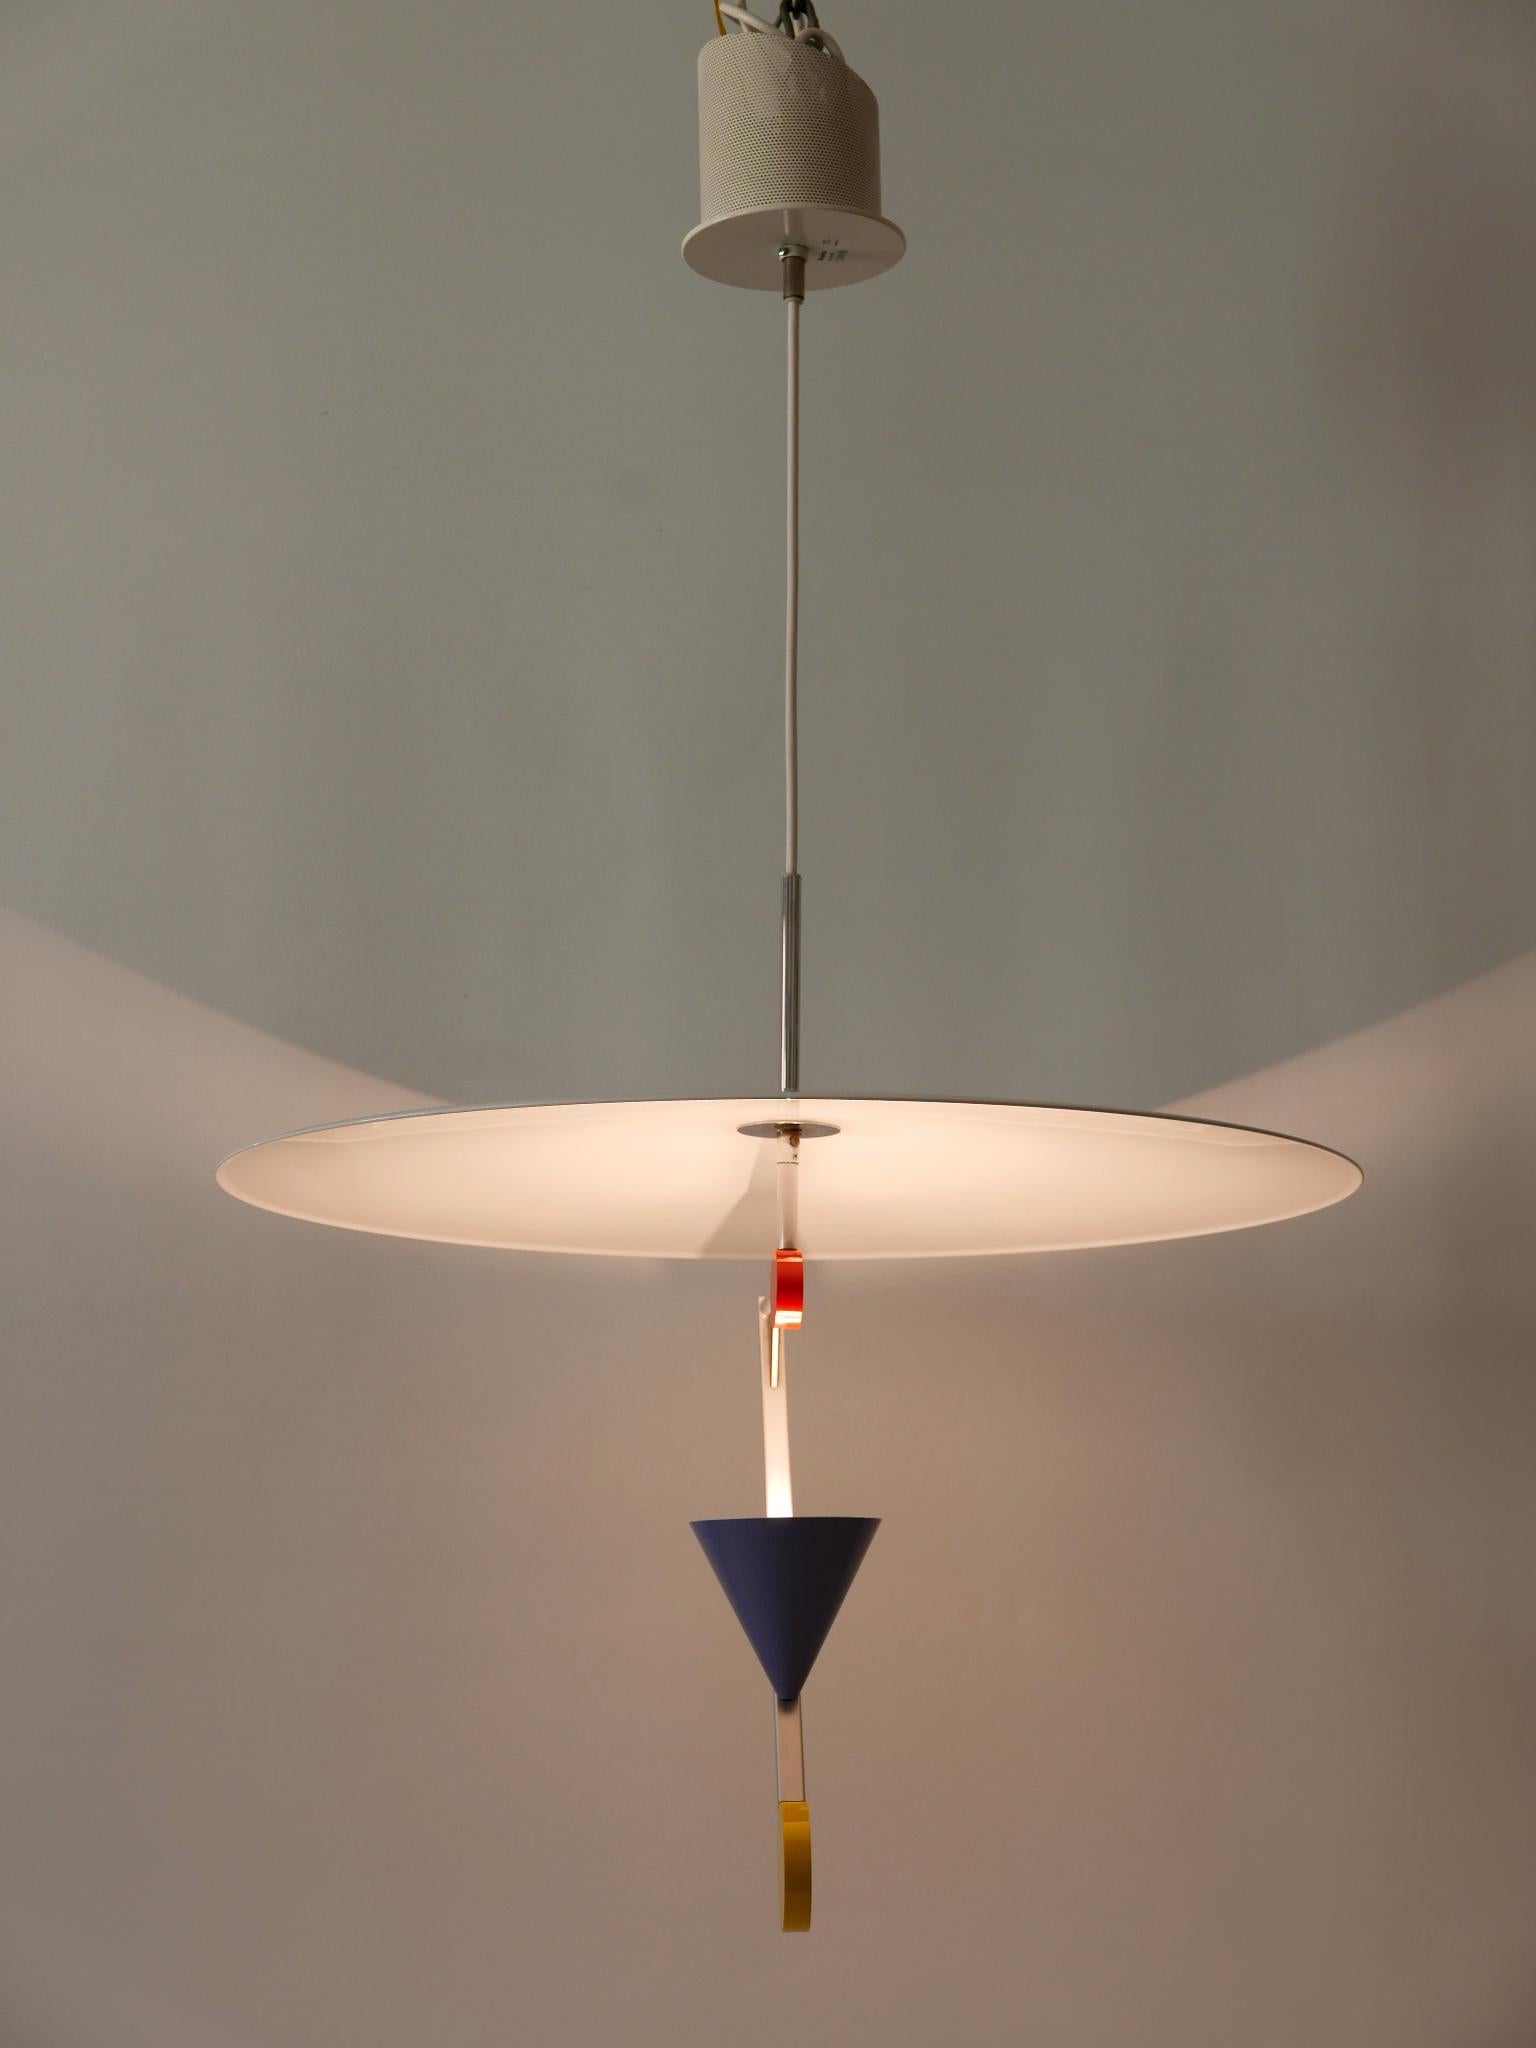 Incroyables lampes suspendues postmodernes Halo There d'Olle Andersson pour Borens 1982 en vente 2